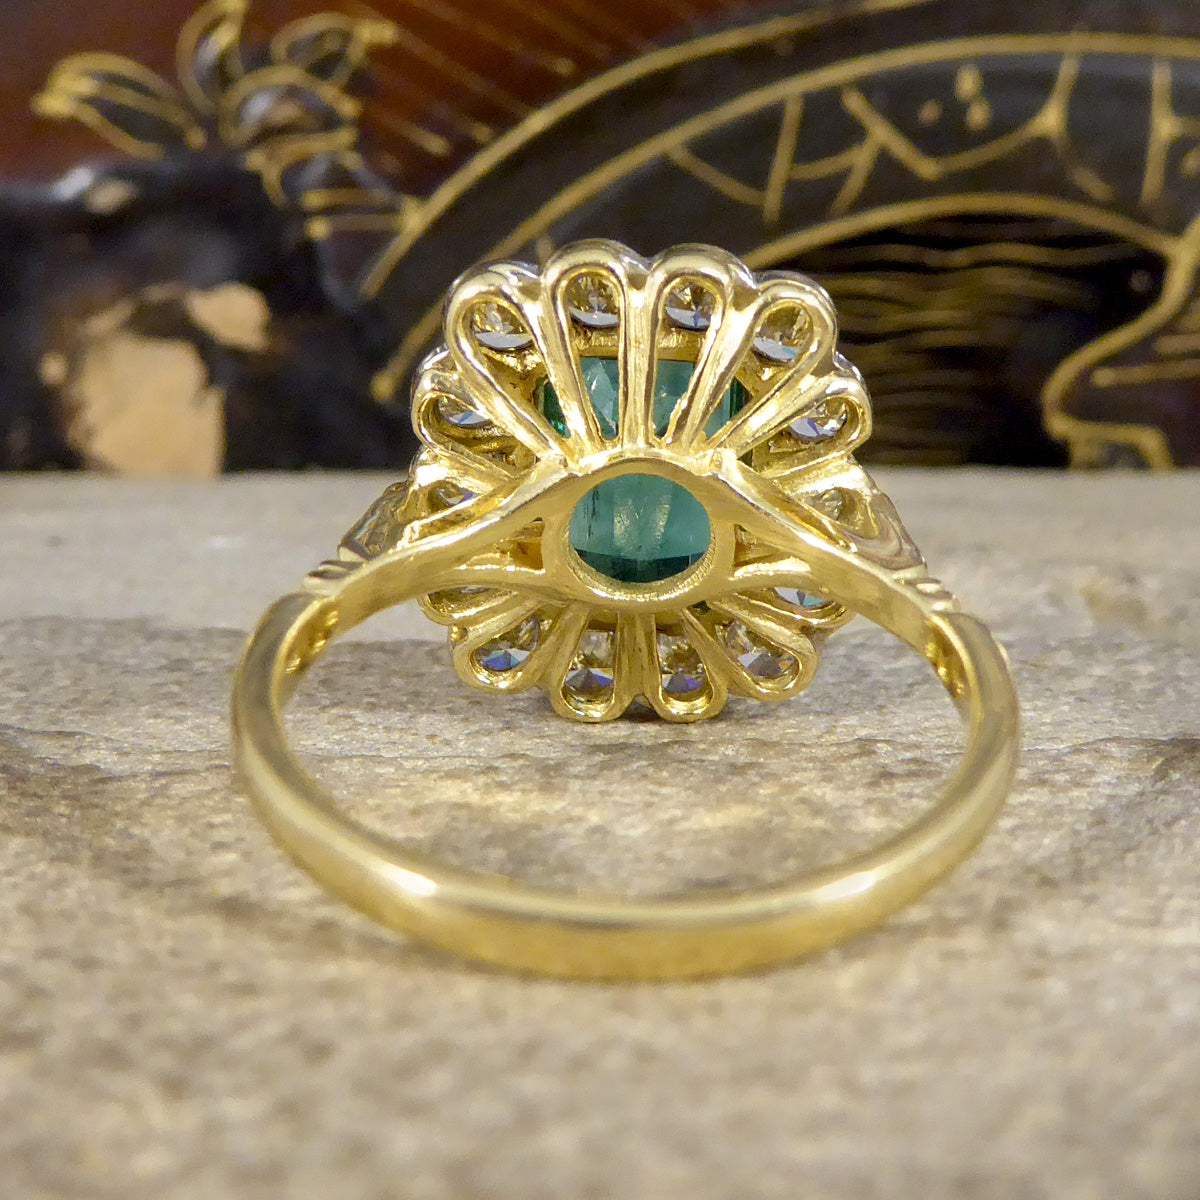 Contemporary Edwardian Style 2.50ct Emerald and 1.20ct Diamond Cluster Ring in 18ct Gold